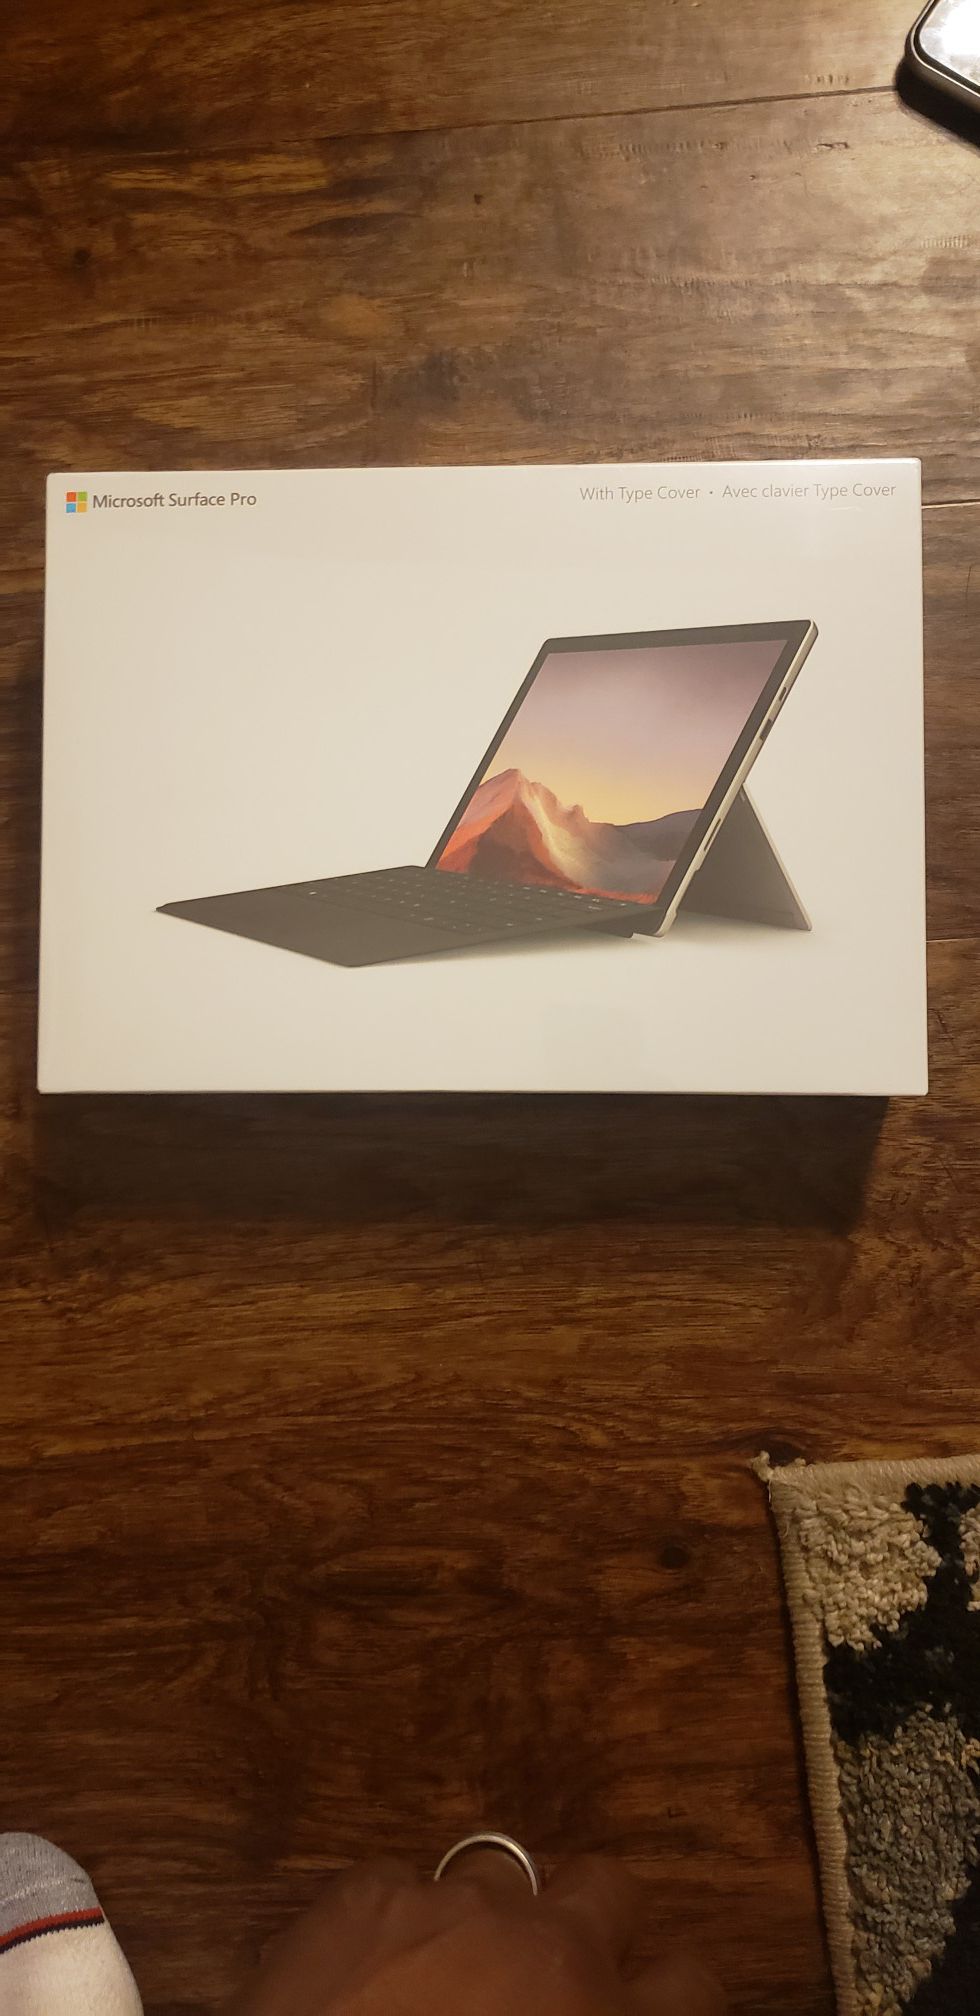 MICROSOFT SURFACE PRO 7 BRAND NEW FACTORY SEALED INSIDE THE BOX MY PRICE IS FIRM THANK YOU.